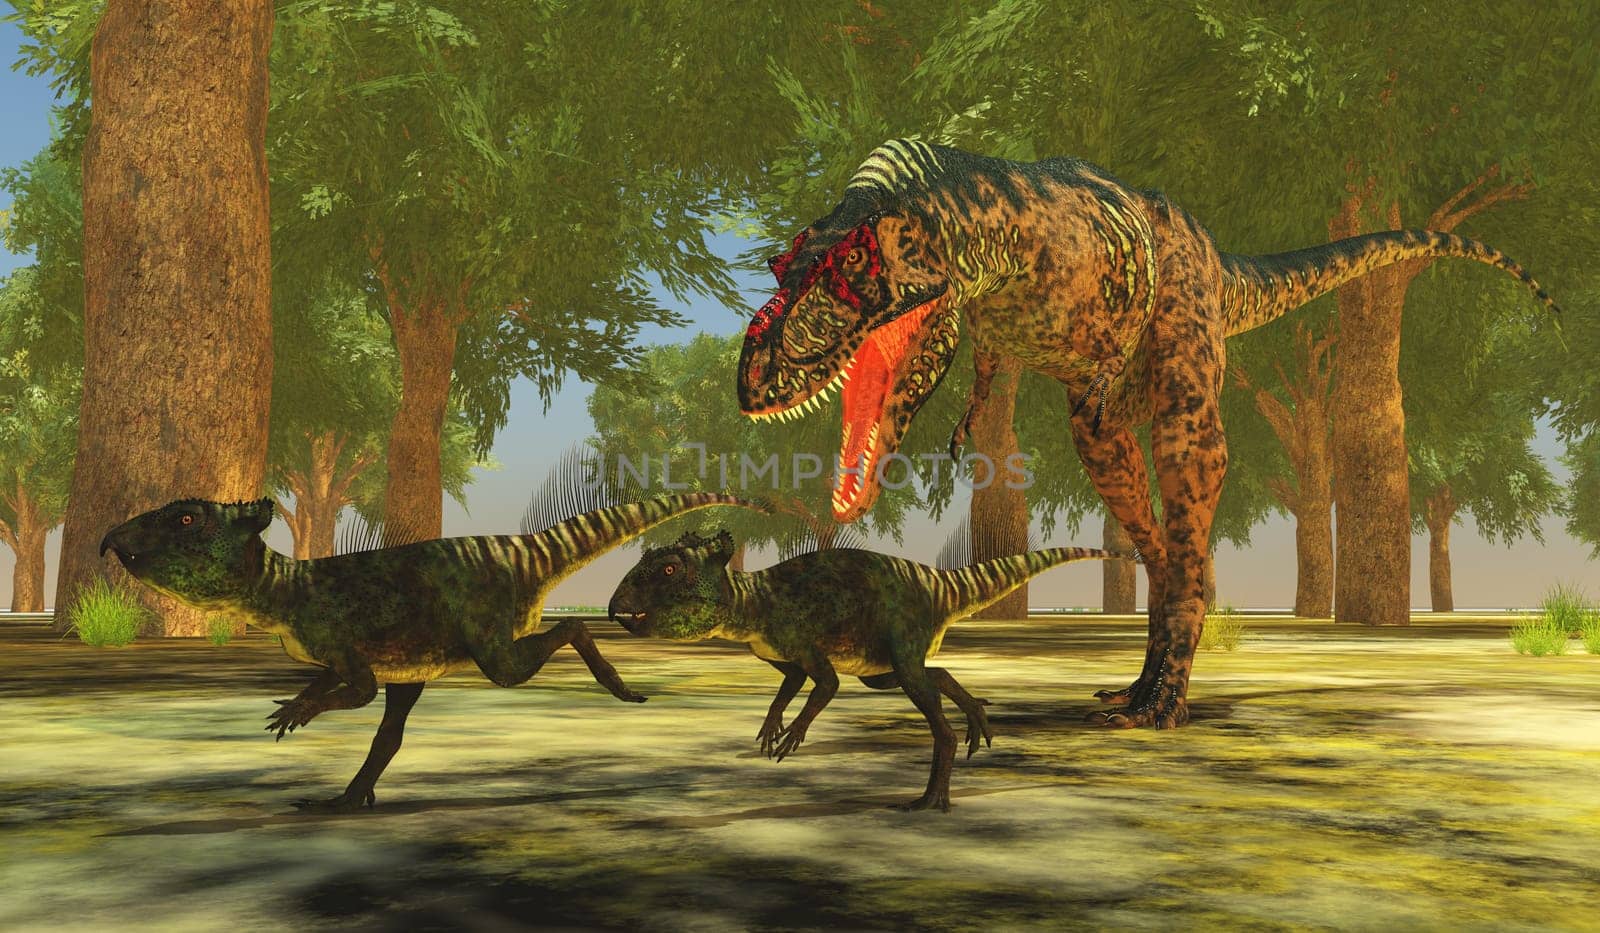 Theropod Albertosaurus runs after a couple of herbivorous Archaeoceratops during the Cretaceous period of North America.